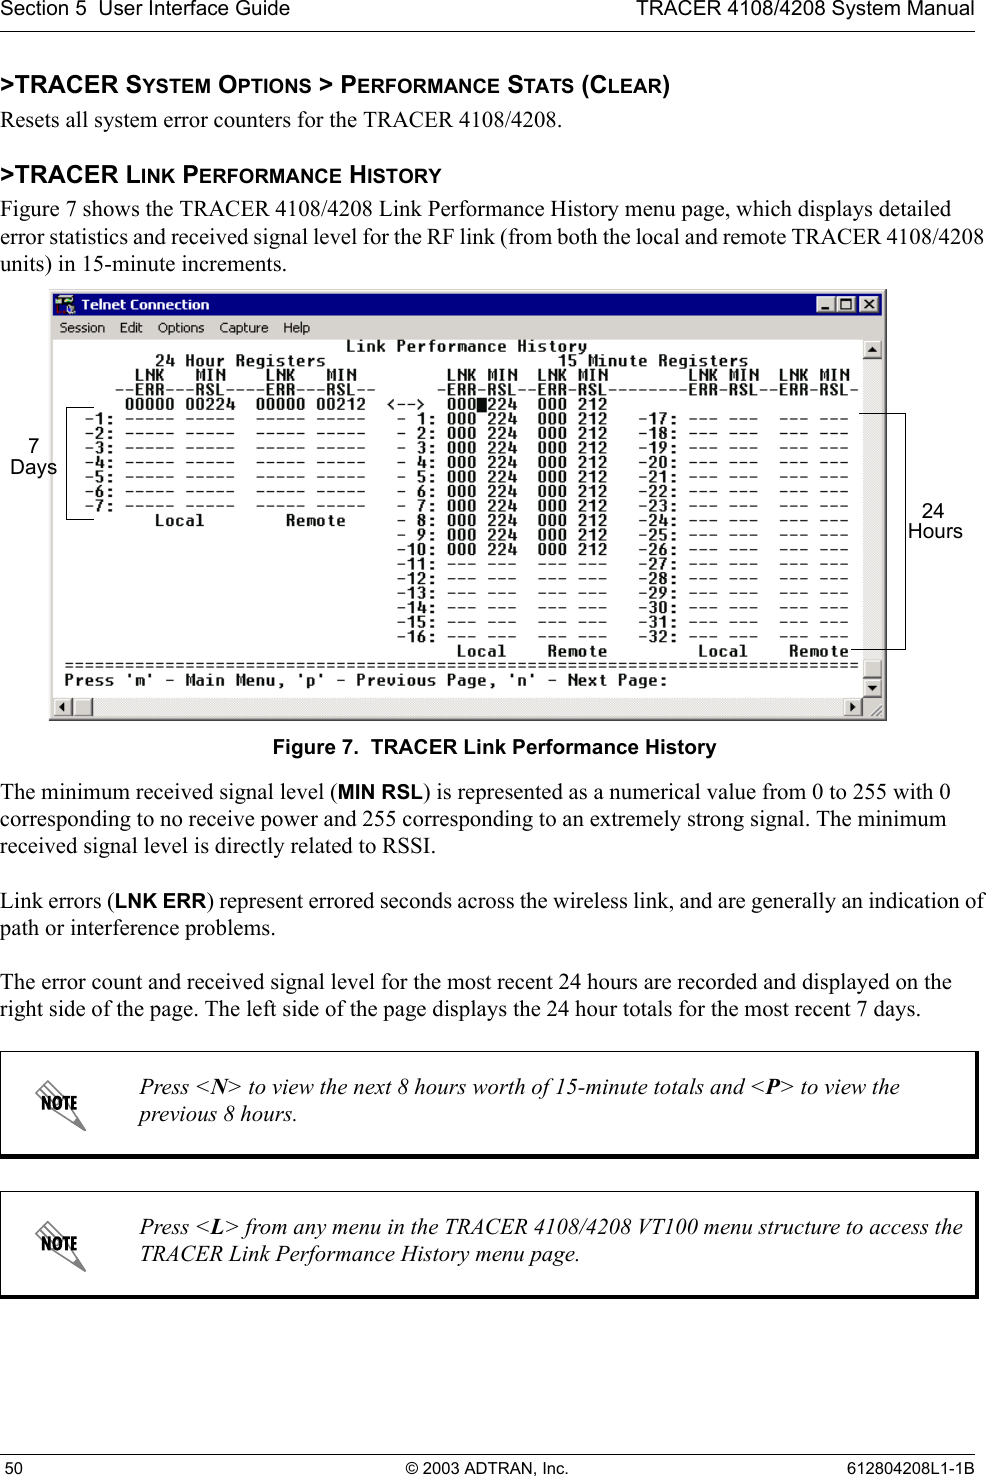 Section 5  User Interface Guide TRACER 4108/4208 System Manual 50 © 2003 ADTRAN, Inc. 612804208L1-1B&gt;TRACER SYSTEM OPTIONS &gt; PERFORMANCE STATS (CLEAR)Resets all system error counters for the TRACER 4108/4208.&gt;TRACER LINK PERFORMANCE HISTORYFigure 7 shows the TRACER 4108/4208 Link Performance History menu page, which displays detailed error statistics and received signal level for the RF link (from both the local and remote TRACER 4108/4208 units) in 15-minute increments. Figure 7.  TRACER Link Performance HistoryThe minimum received signal level (MIN RSL) is represented as a numerical value from 0 to 255 with 0 corresponding to no receive power and 255 corresponding to an extremely strong signal. The minimum received signal level is directly related to RSSI.Link errors (LNK ERR) represent errored seconds across the wireless link, and are generally an indication of path or interference problems.The error count and received signal level for the most recent 24 hours are recorded and displayed on the right side of the page. The left side of the page displays the 24 hour totals for the most recent 7 days. Press &lt;N&gt; to view the next 8 hours worth of 15-minute totals and &lt;P&gt; to view the previous 8 hours.Press &lt;L&gt; from any menu in the TRACER 4108/4208 VT100 menu structure to access the TRACER Link Performance History menu page.24 Hours7 Days